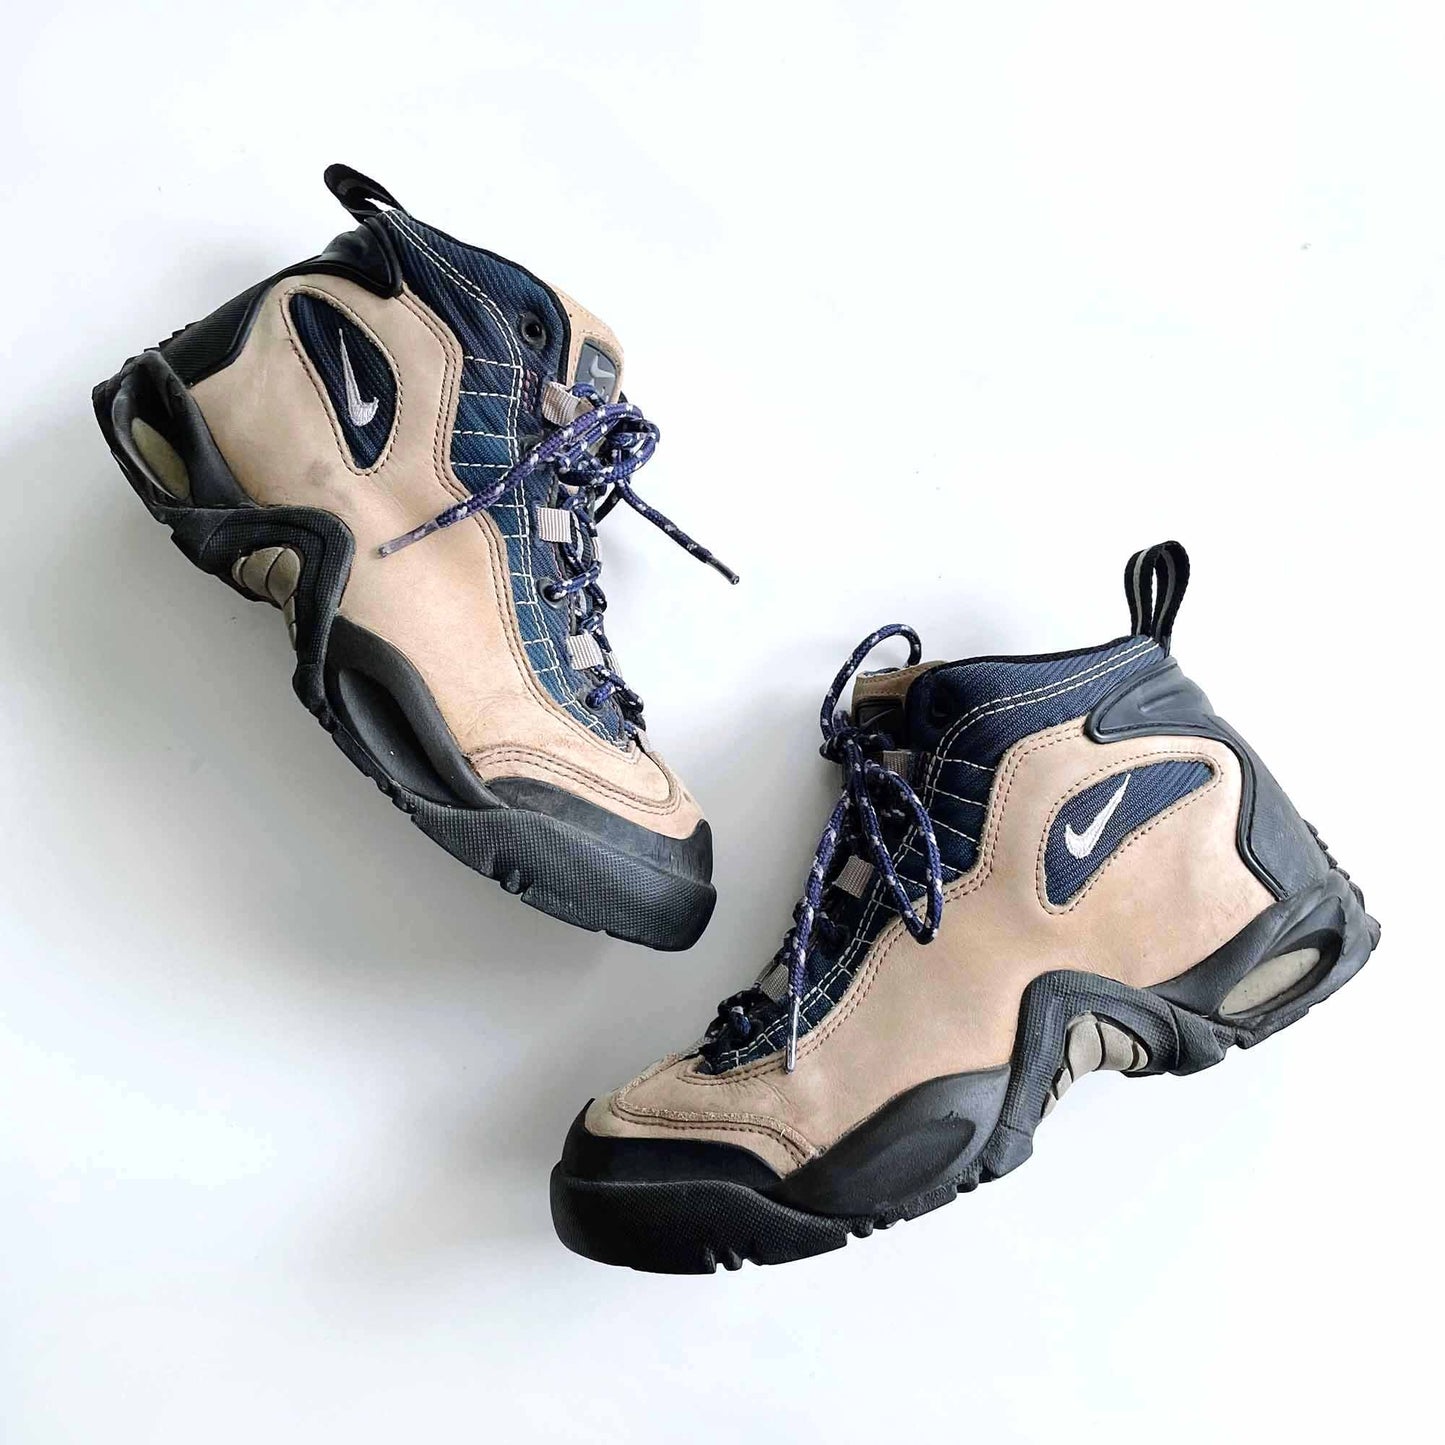 vintage nike acg 1998 leather hiking boots - size 8.5 W